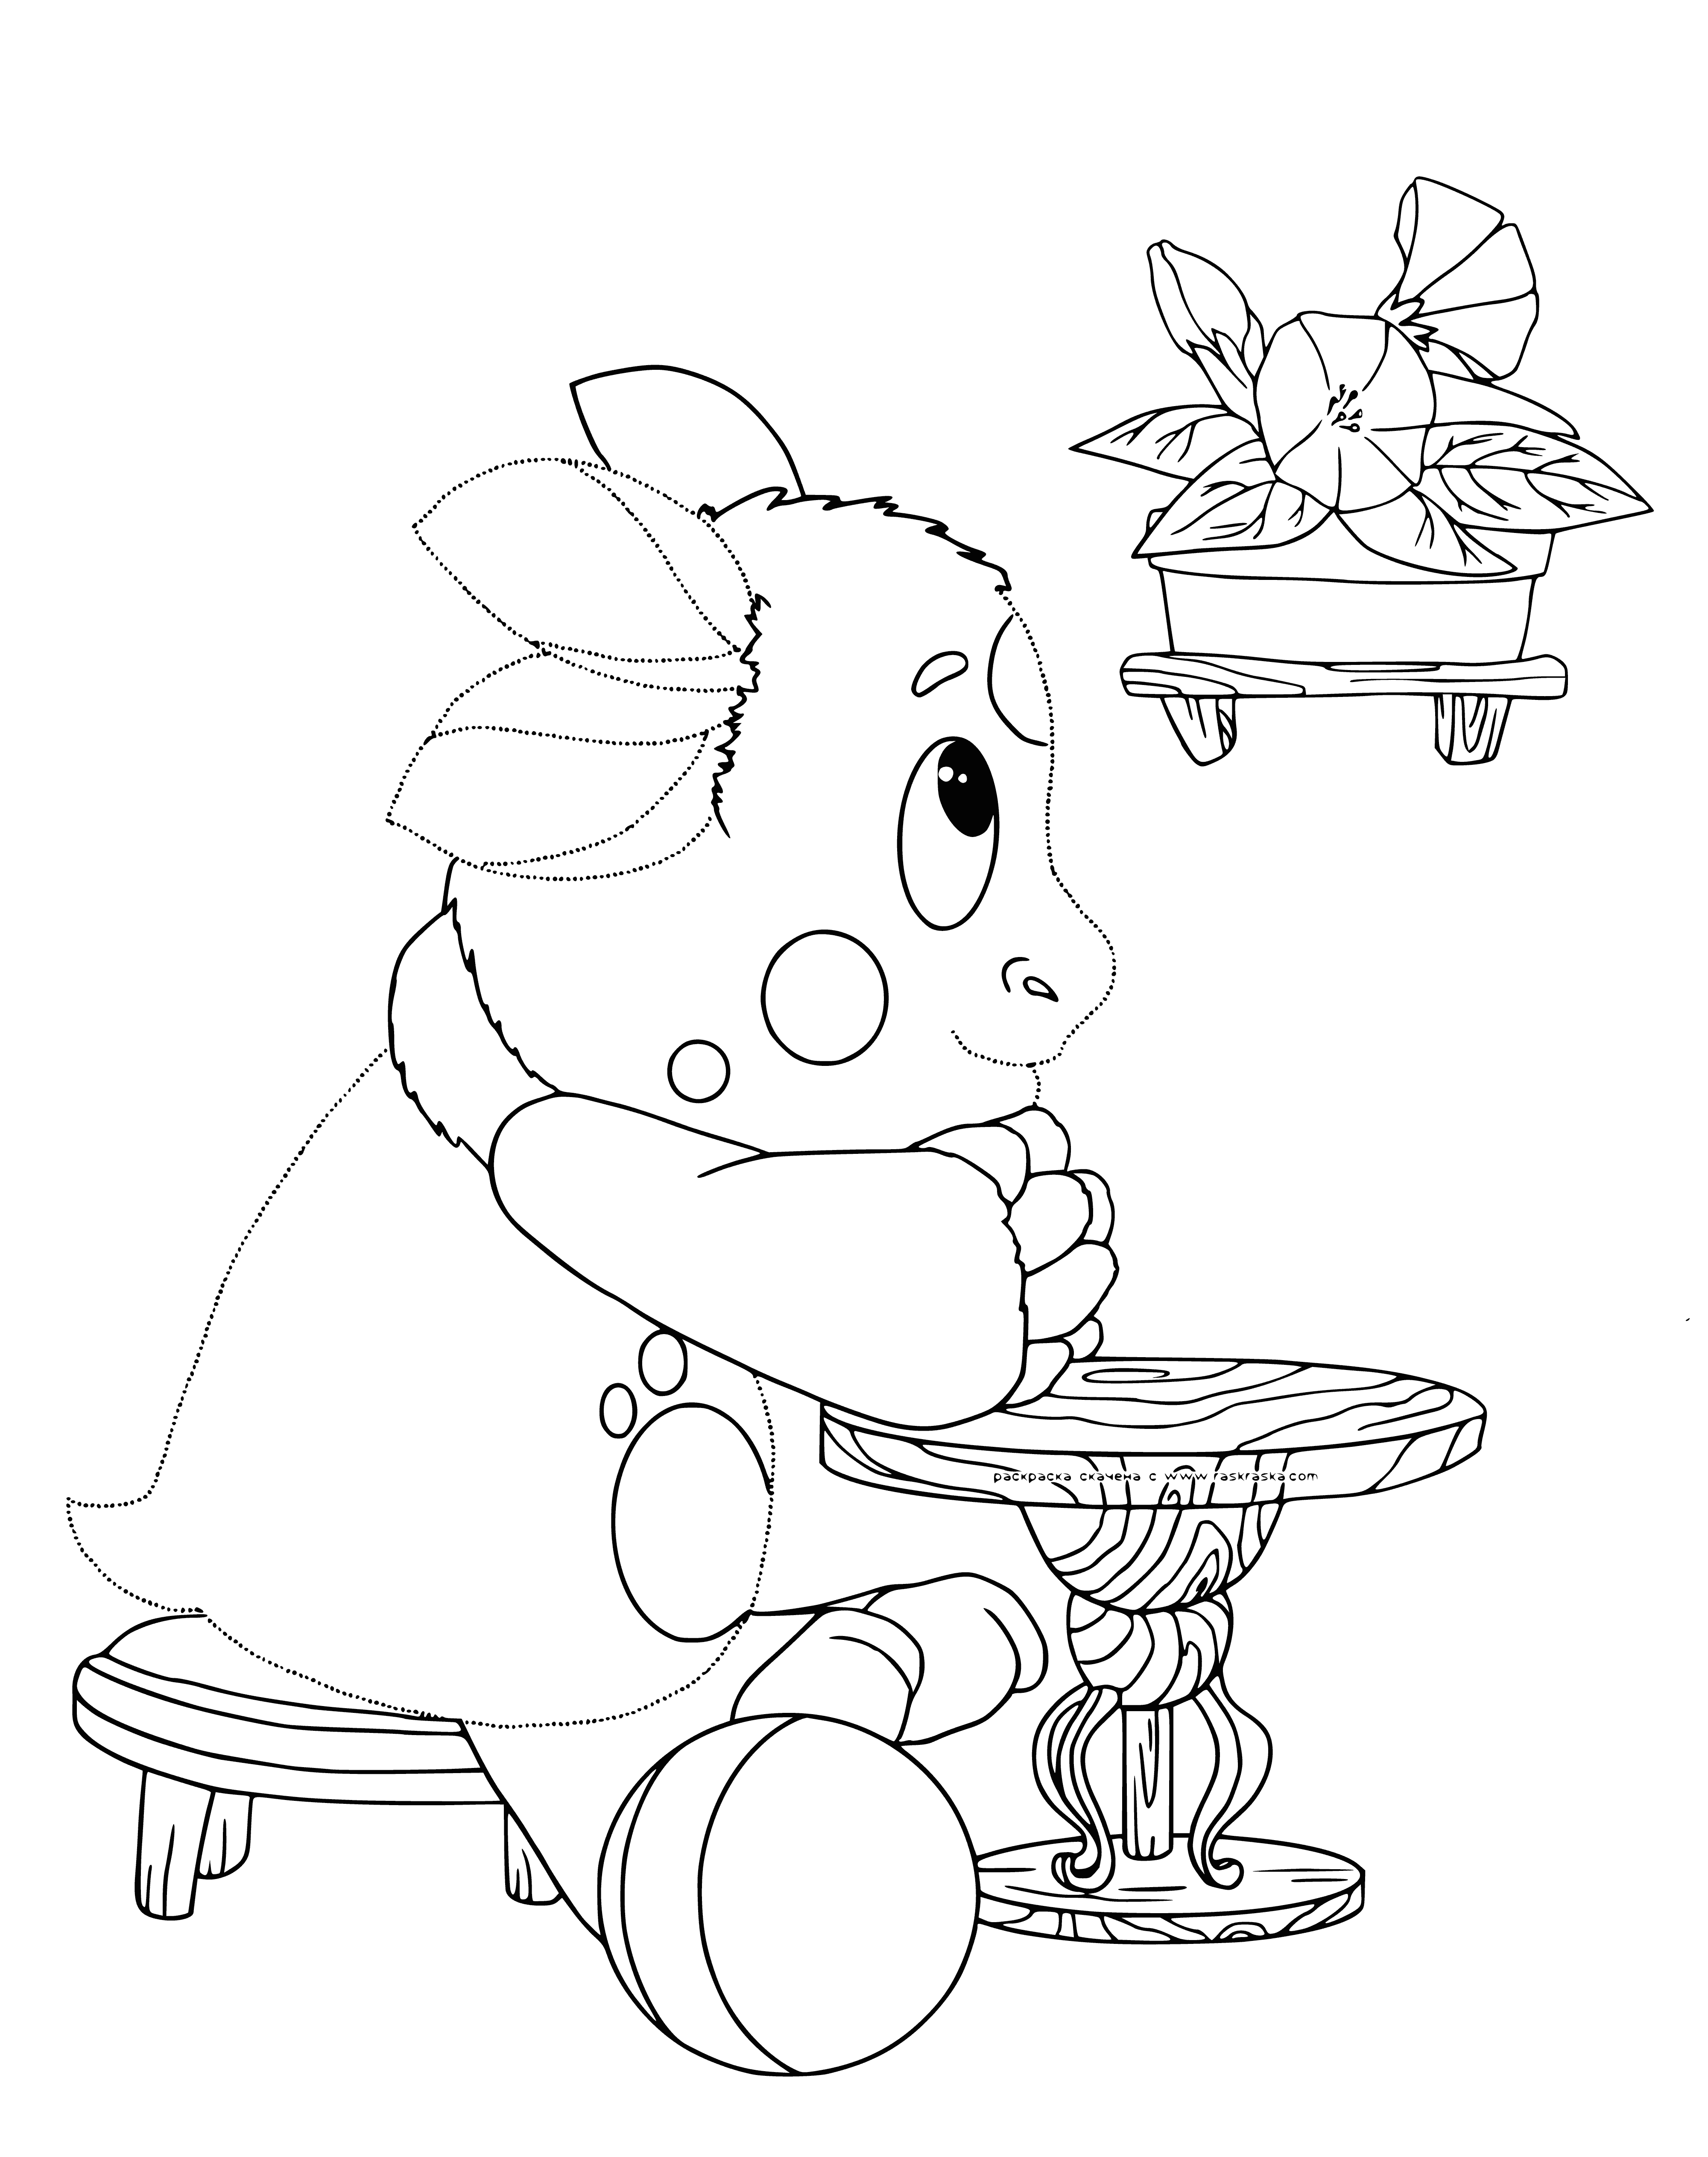 coloring page: Luntik and friends with red, blue and green noses are smiling and having fun. #happiness